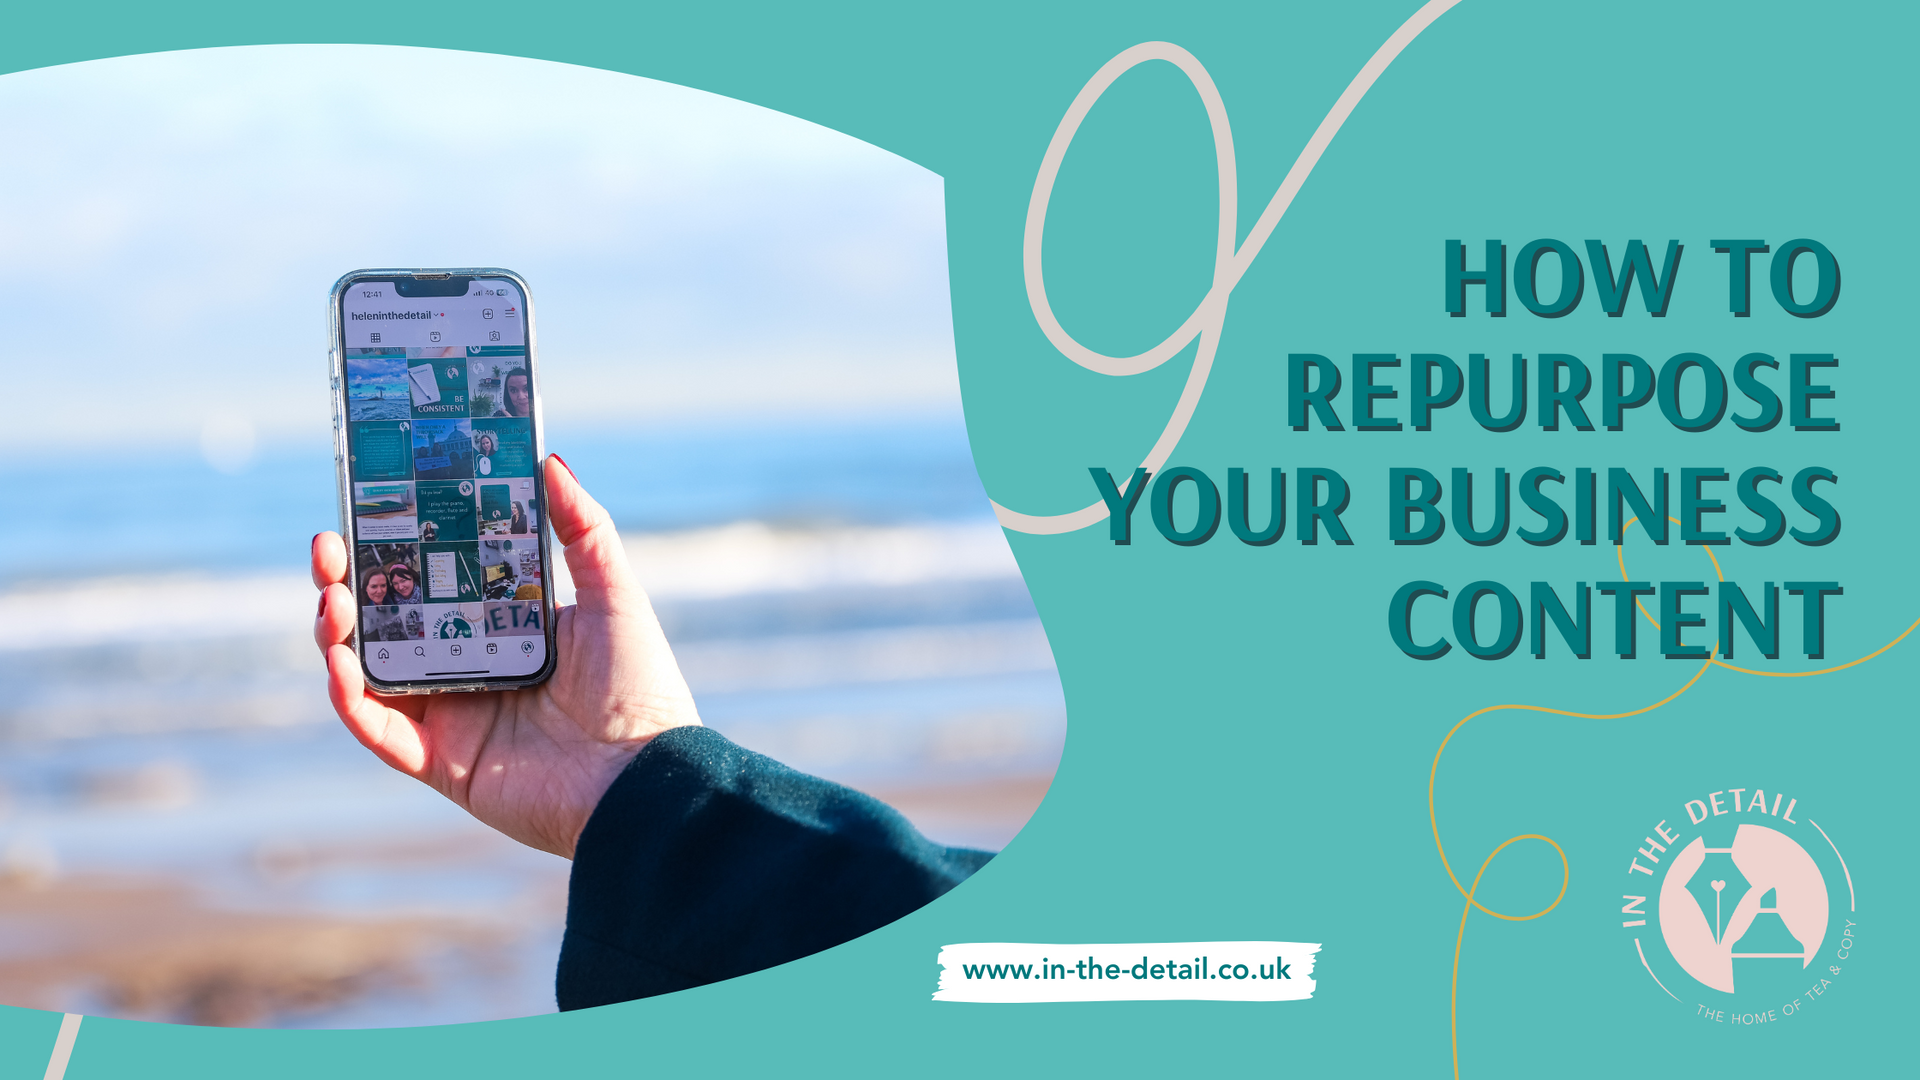 How to repurpose your business content